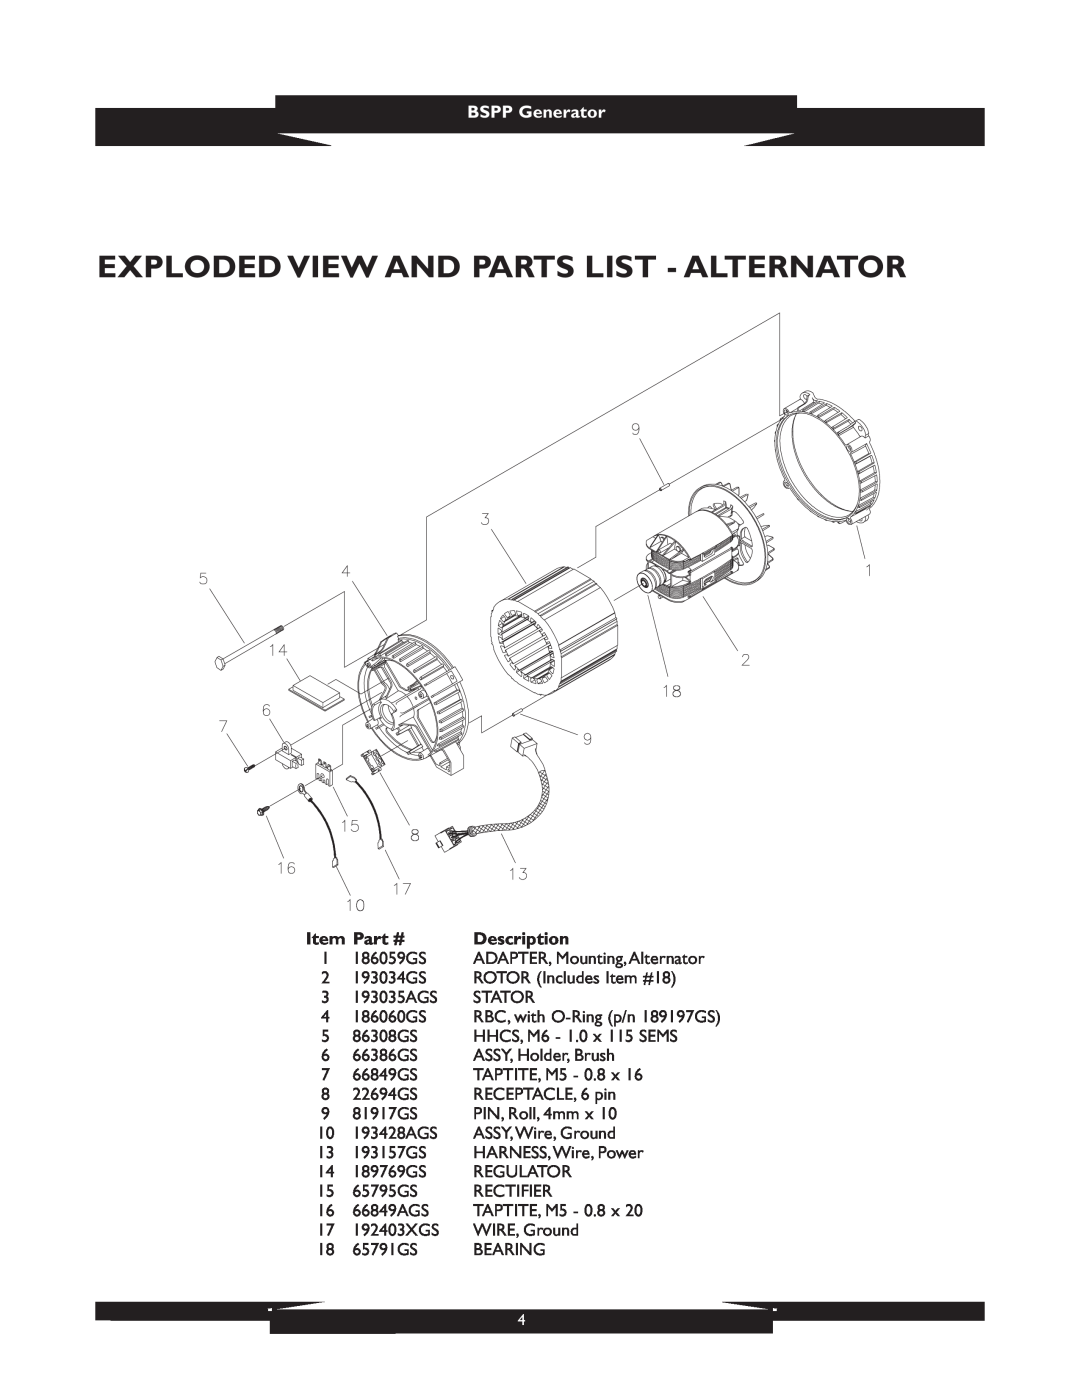 Briggs & Stratton 01933 manual Exploded View And Parts List - Alternator, BSPP Generator, Description 